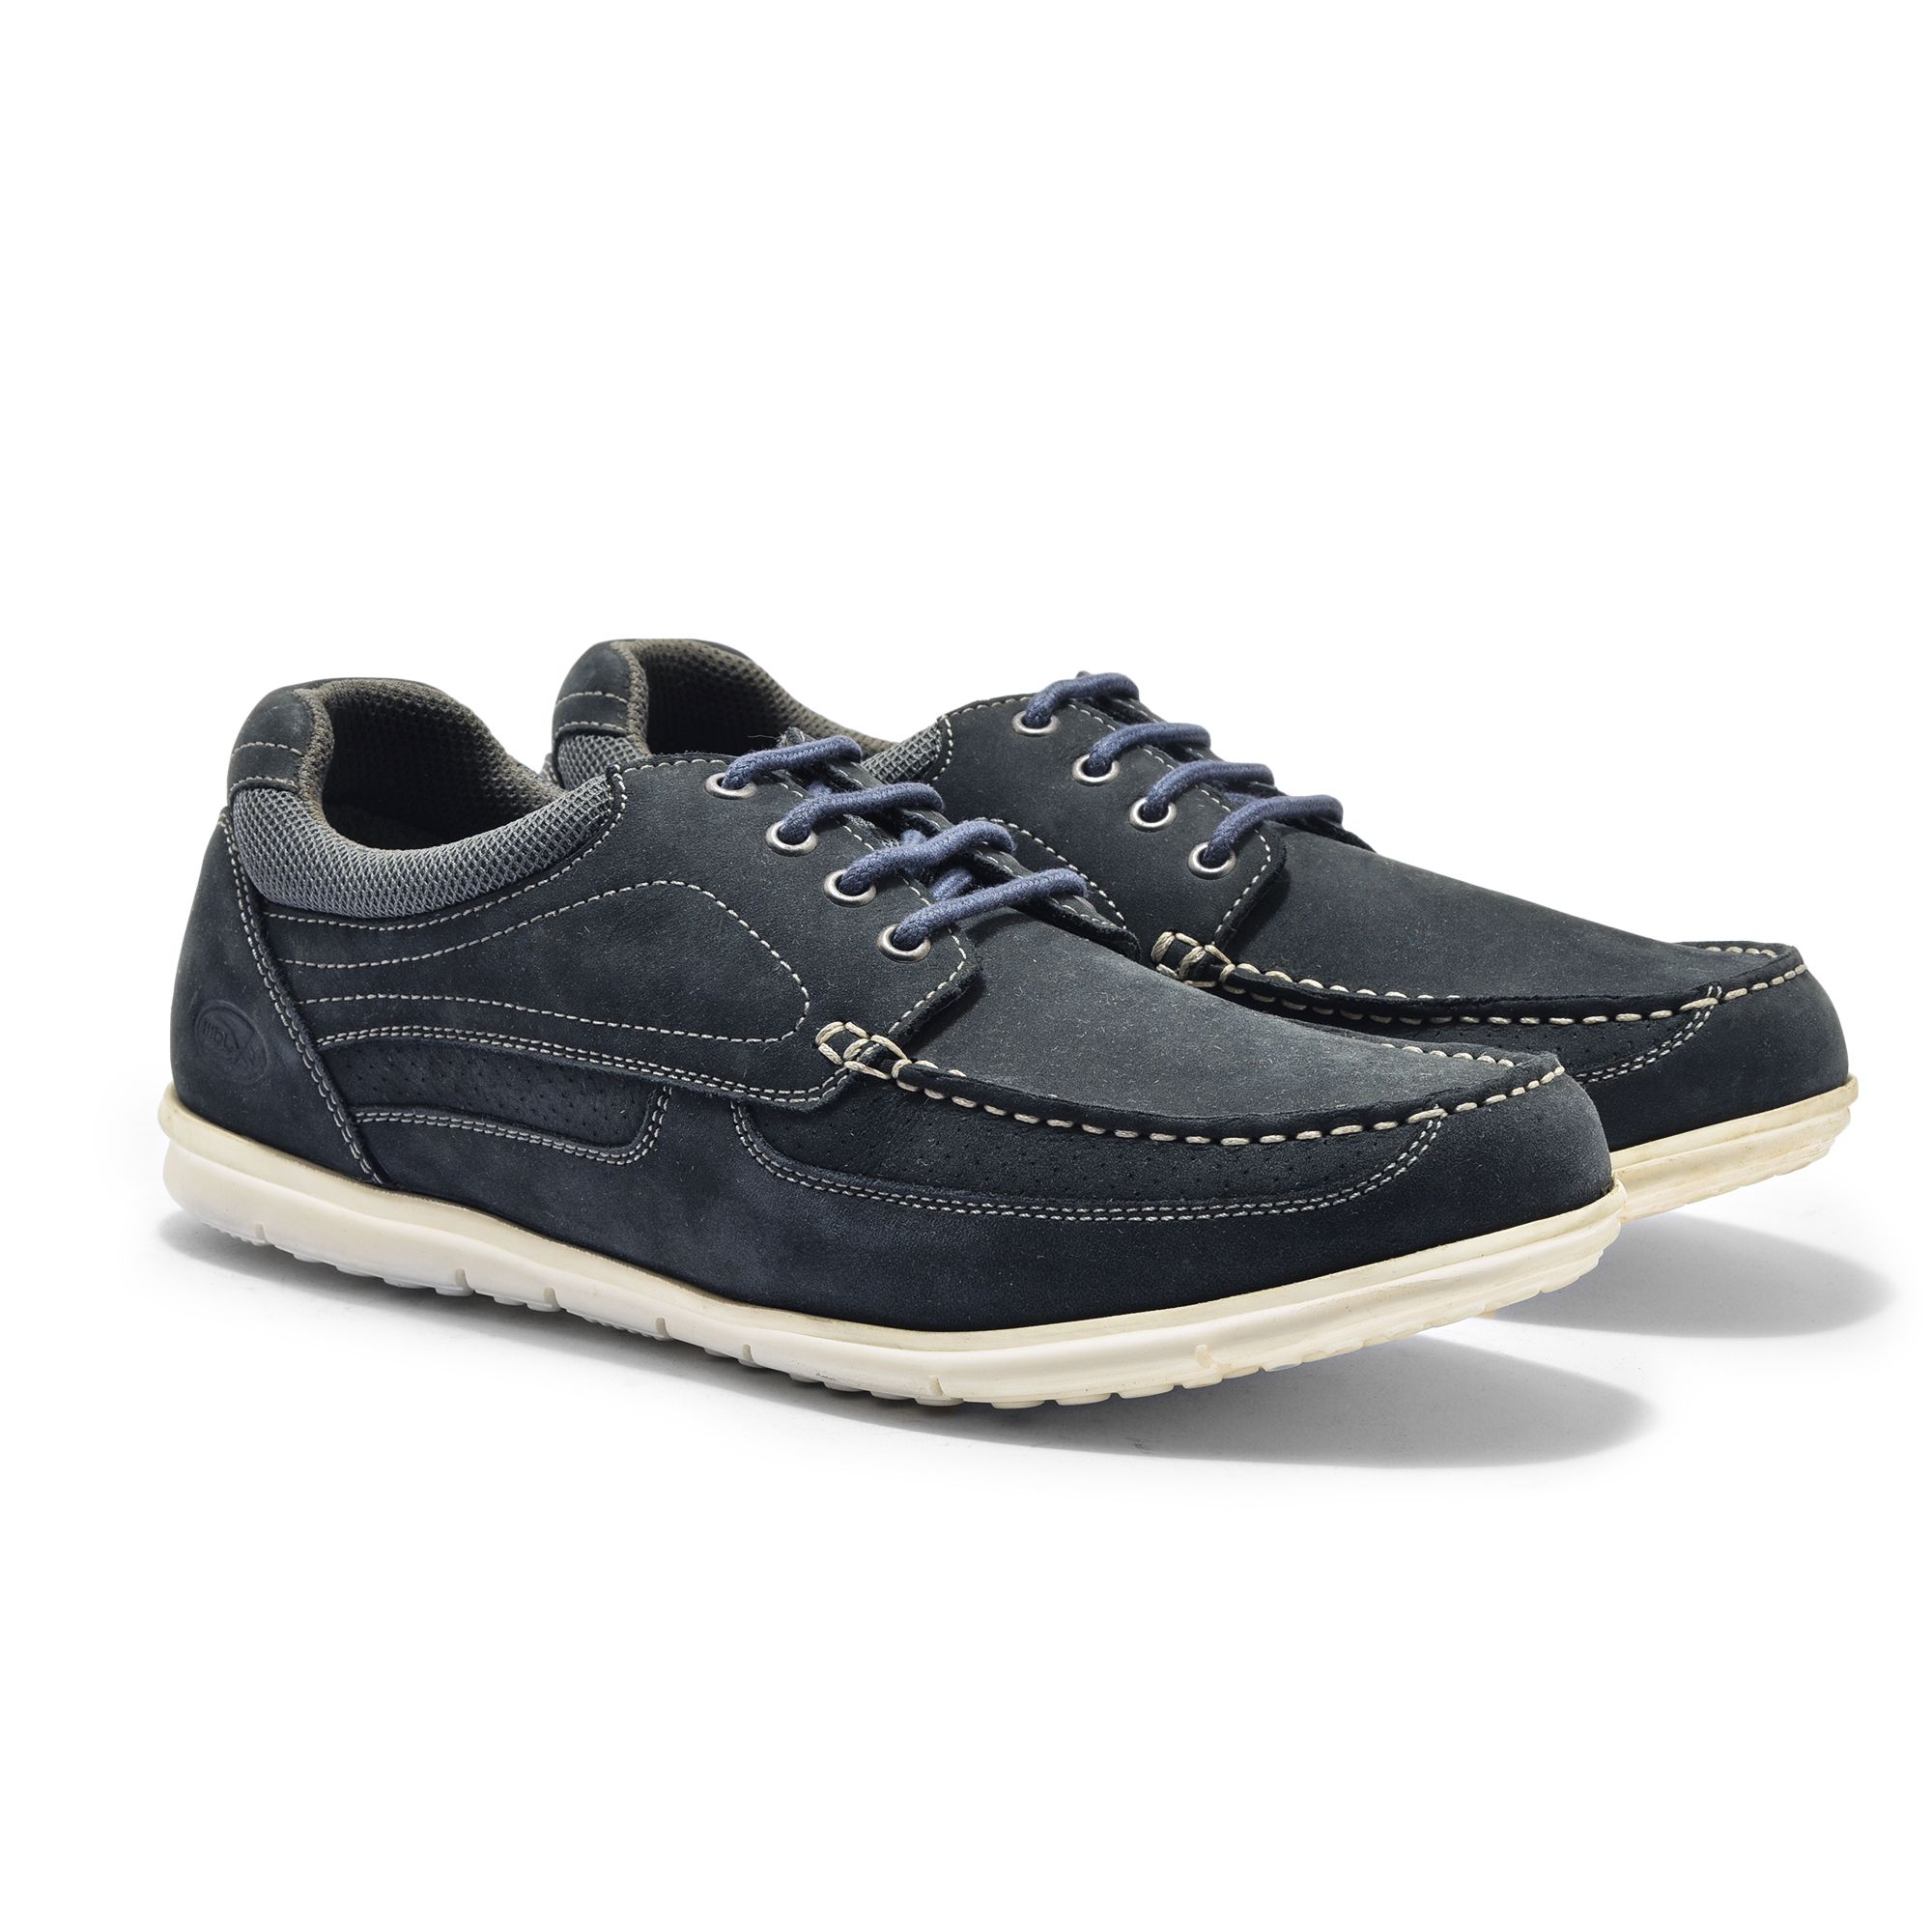 Woodland DNAVY casual shoes